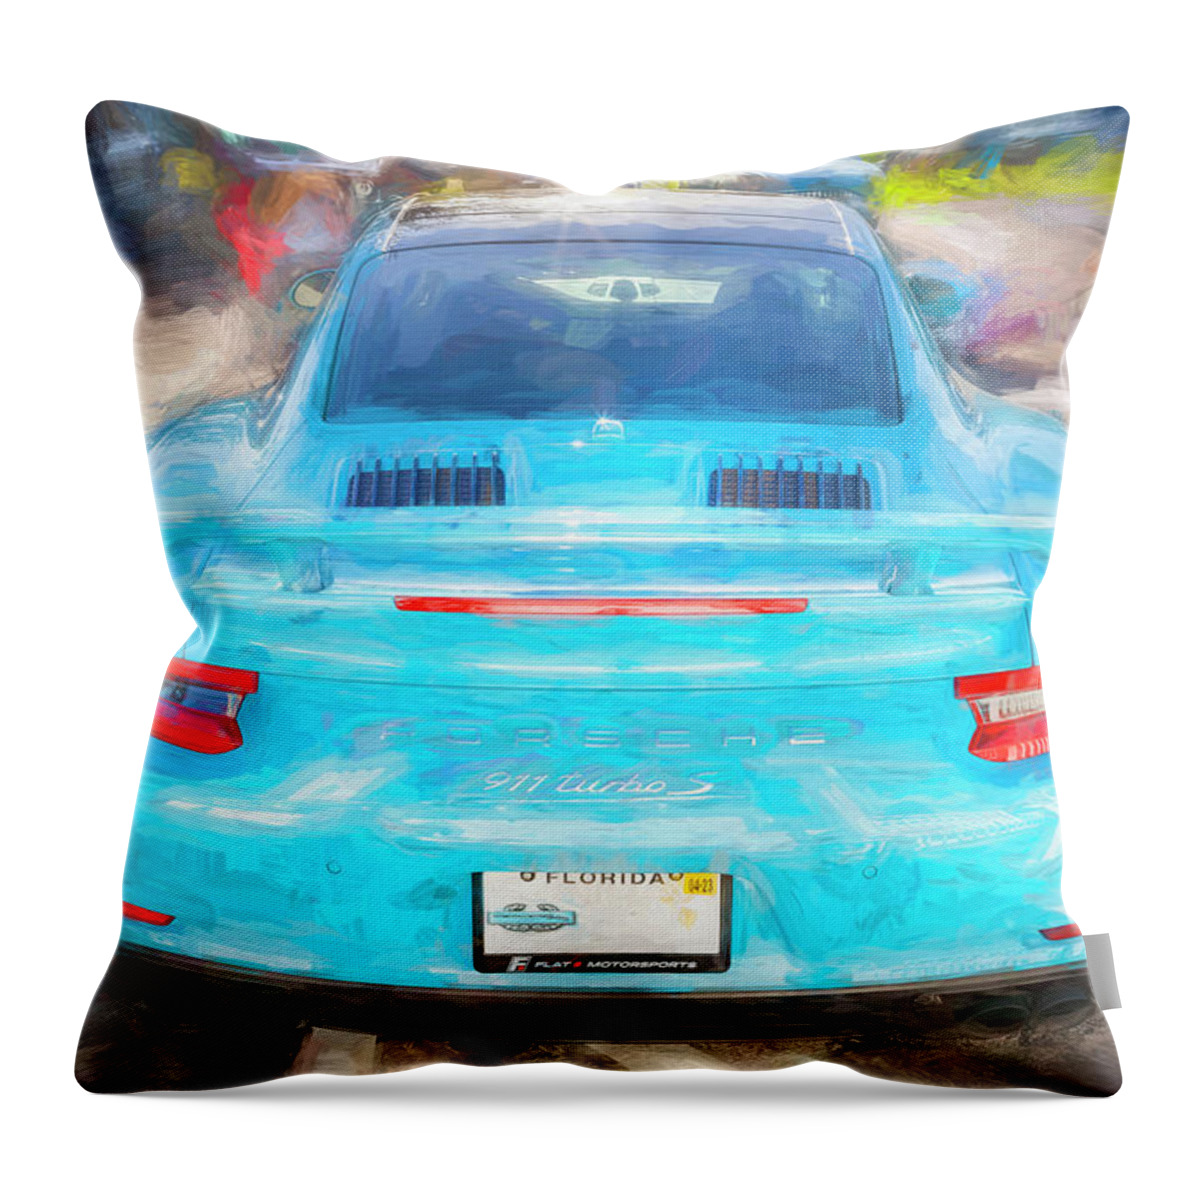 2019 Porsche 911 Turbo S Coupe 991.2 Throw Pillow featuring the photograph 2019 Porsche 911 Turbo S Coupe 991.2 X117 by Rich Franco